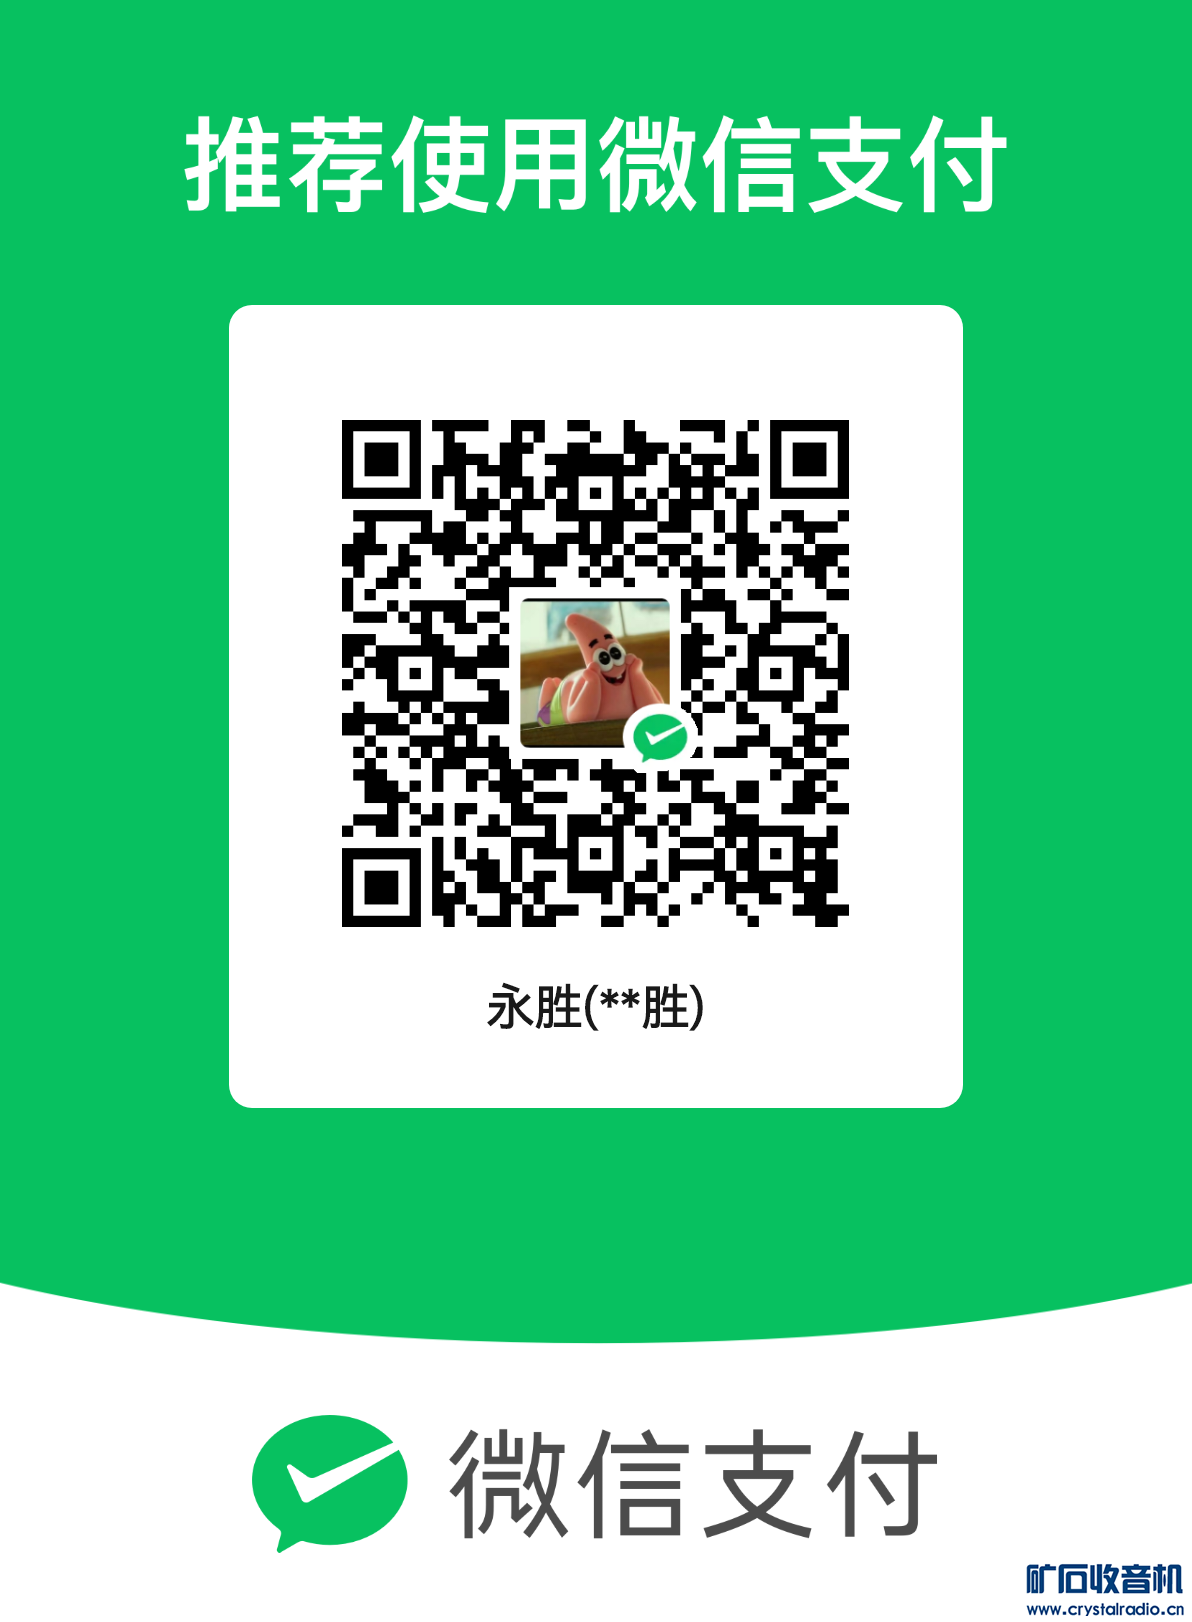 mm_facetoface_collect_qrcode_1702387523180.png